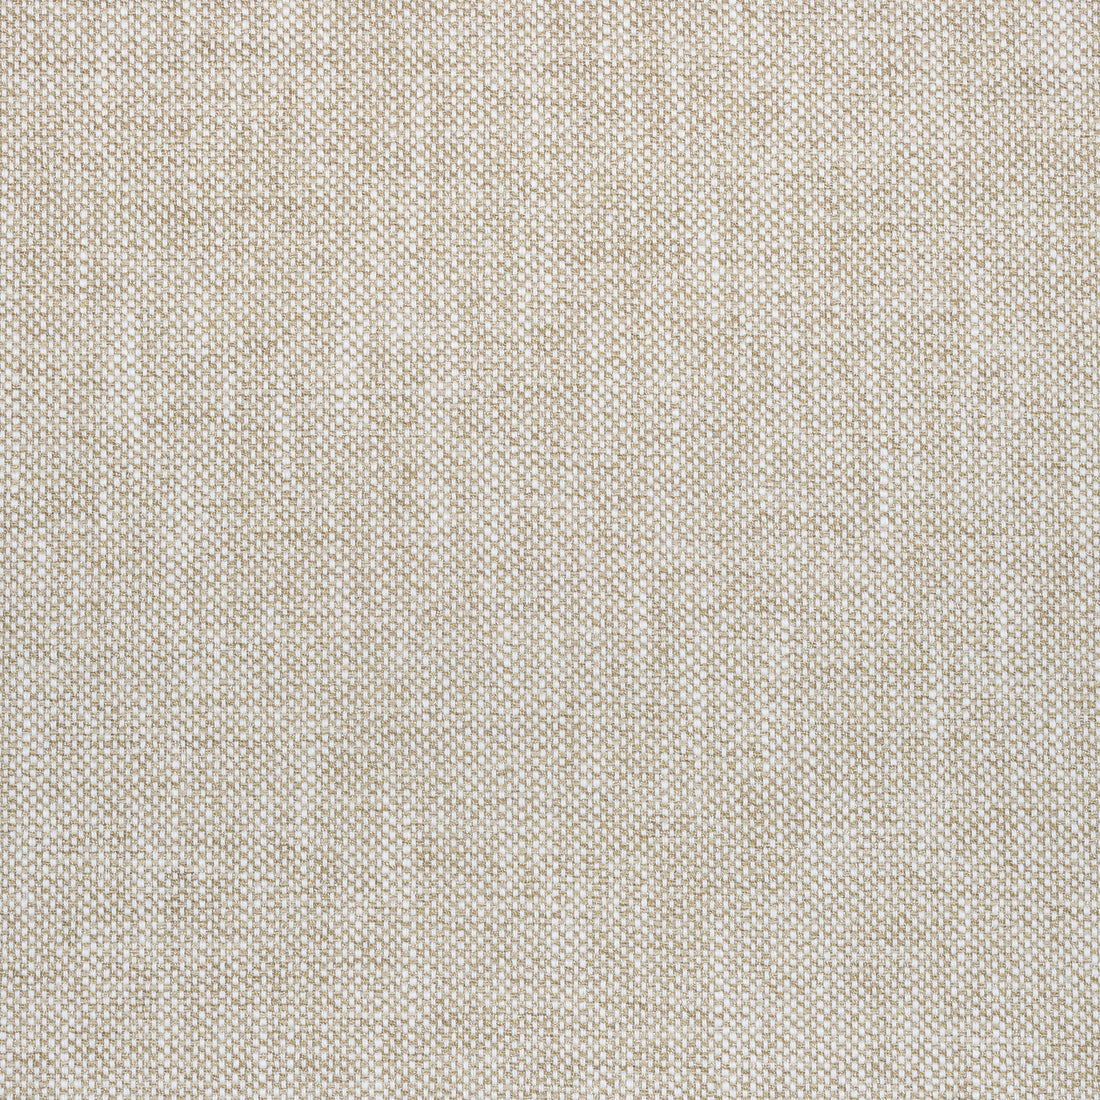 Wellfleet fabric in oatmeal color - pattern number W73424 - by Thibaut in the Landmark Textures collection